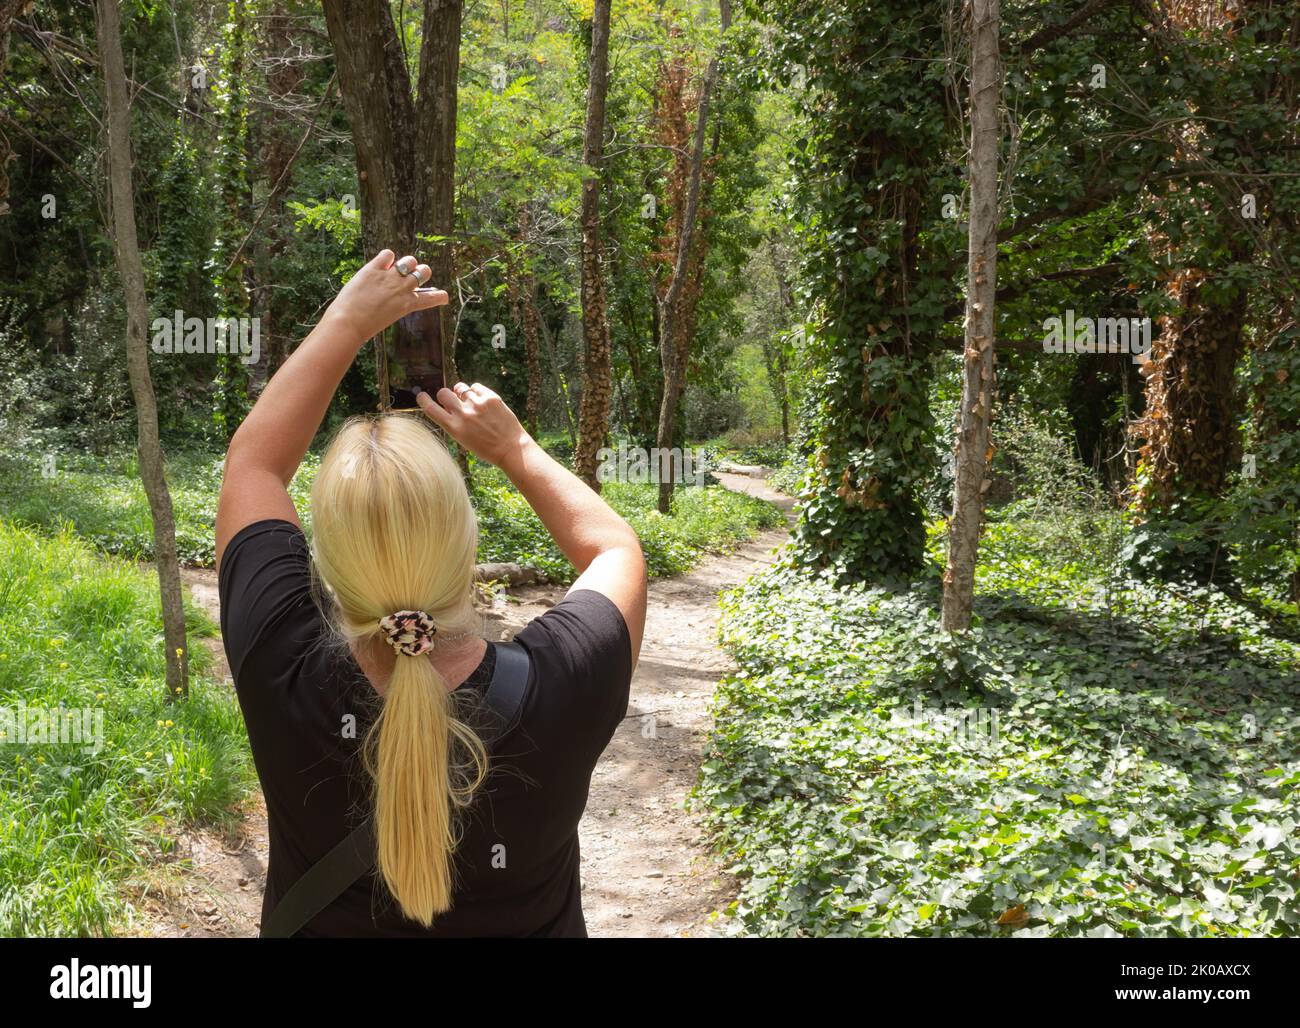 Blonde woman taking a picture in a forest. Stock Photo